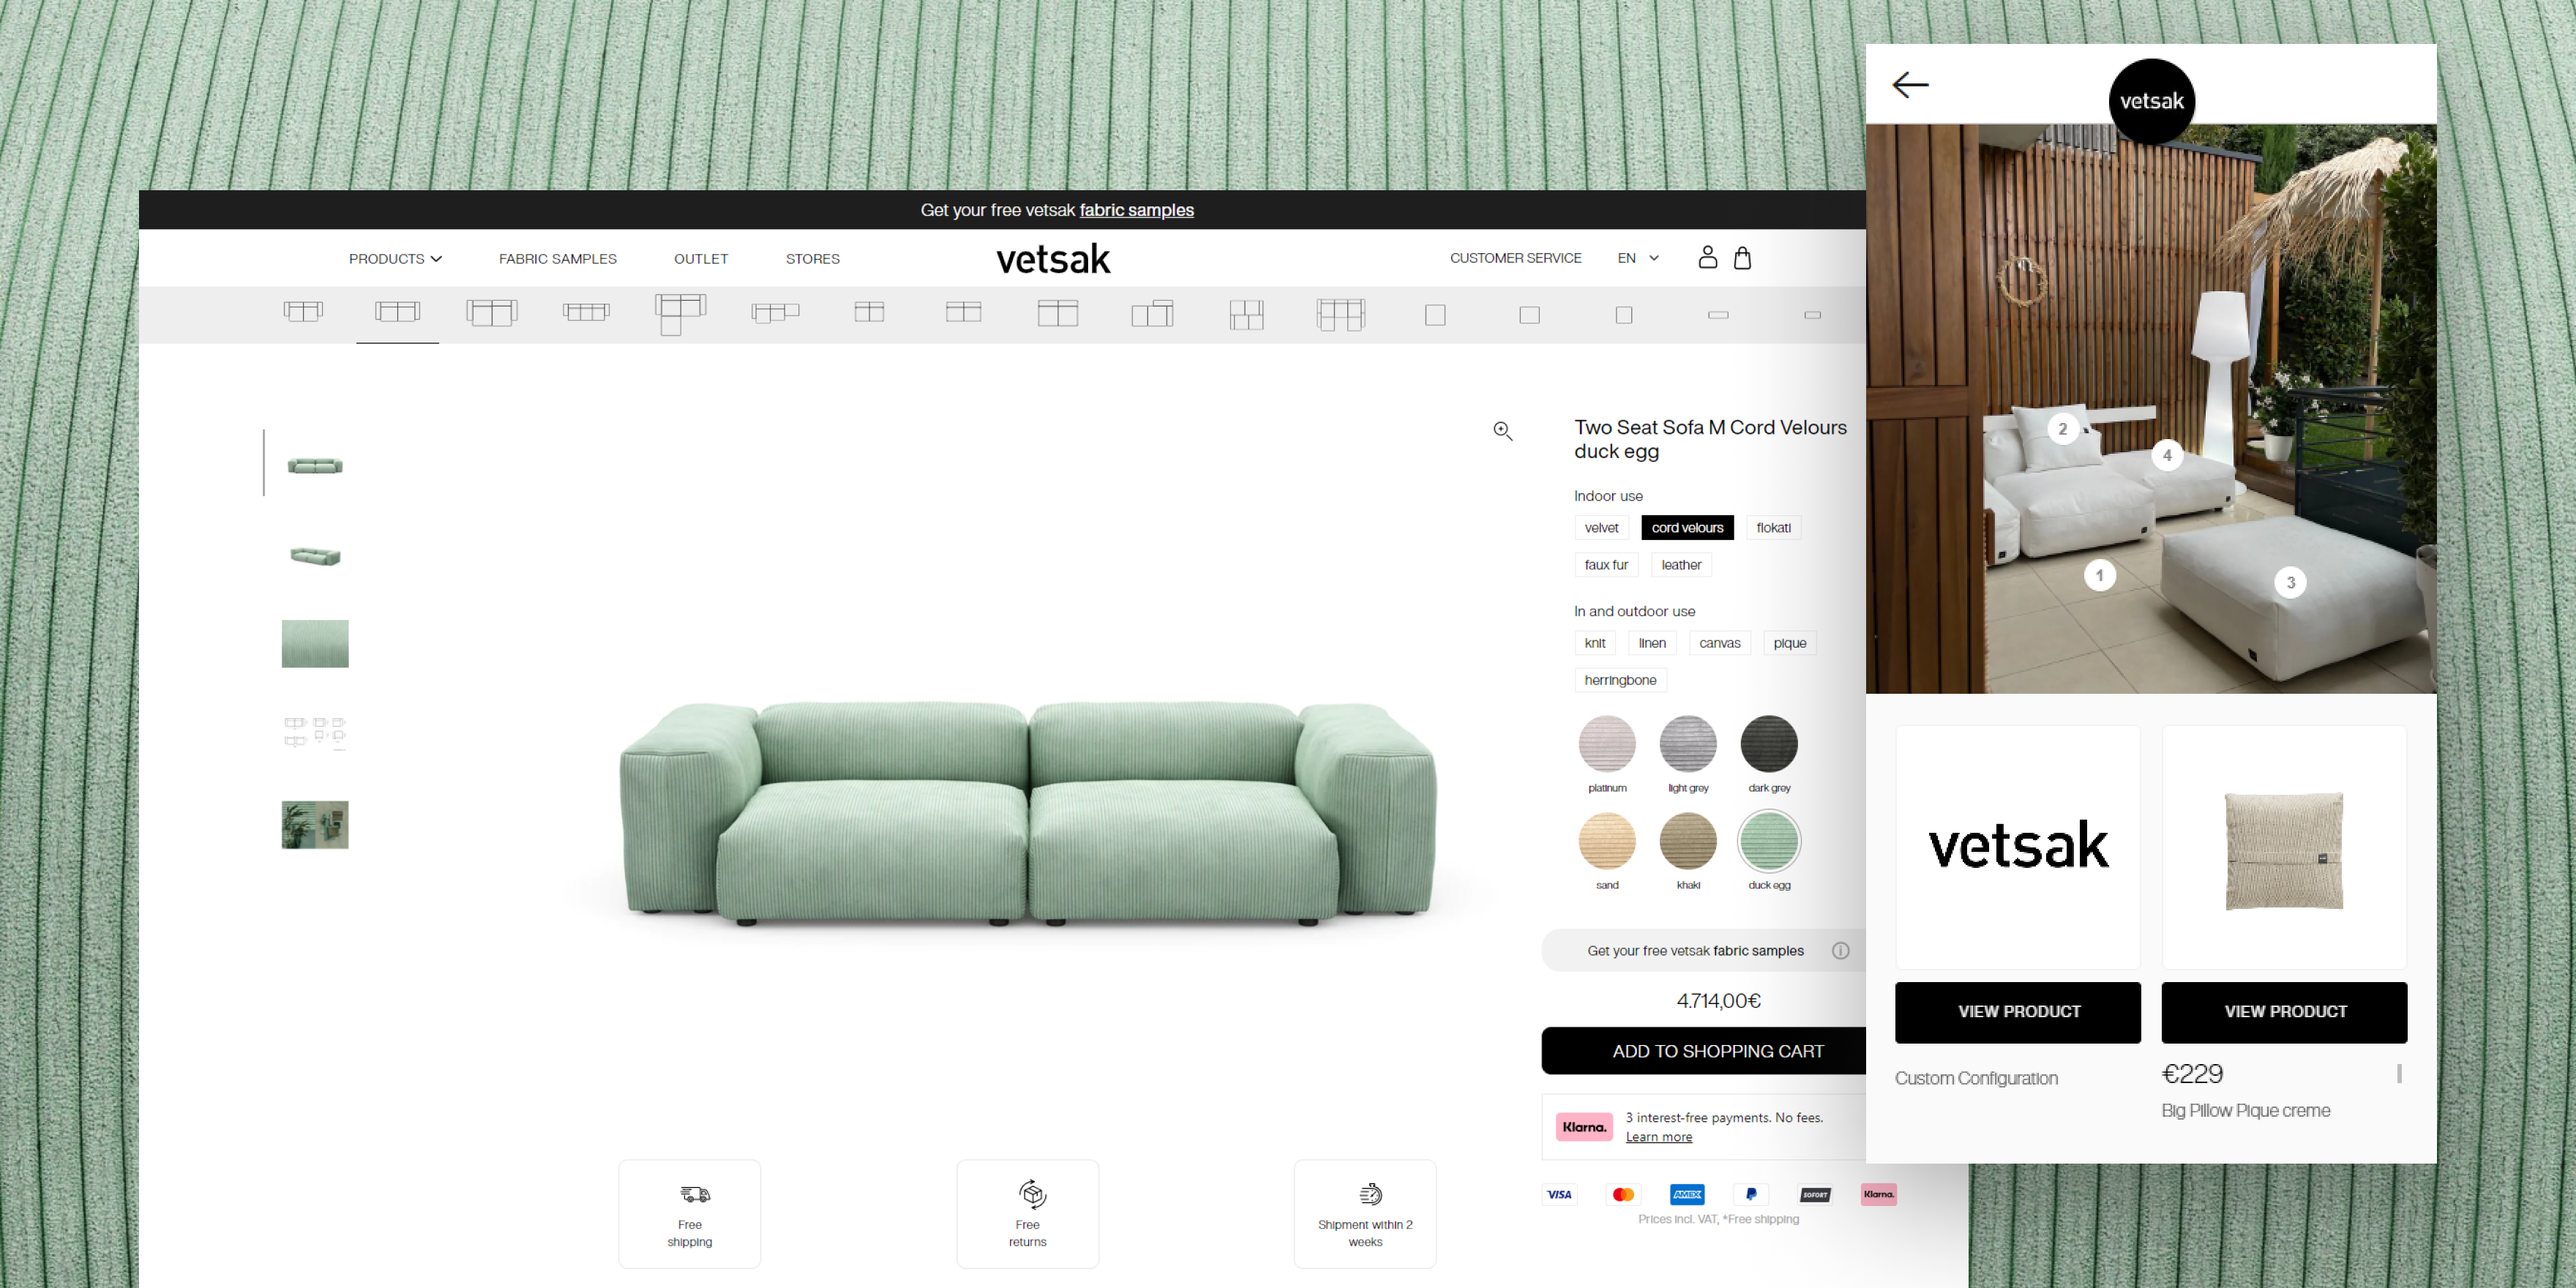 screenshot of the 'vetsak' online furniture store webpage theme designed by WeCanFly agency. The header promotes free fabric samples. On the main section, there's a close-up view of a 'Two Seat Sofa M Cord Velours' in duck egg color with various fabric options available. Adjacent is an outdoor setting featuring multiple white 'vetsak' seating options on a patio, numbered for product identification. The bottom section includes buttons for viewing products and a price tag of £229 for a 'Big Pillow Plaque' in creme.